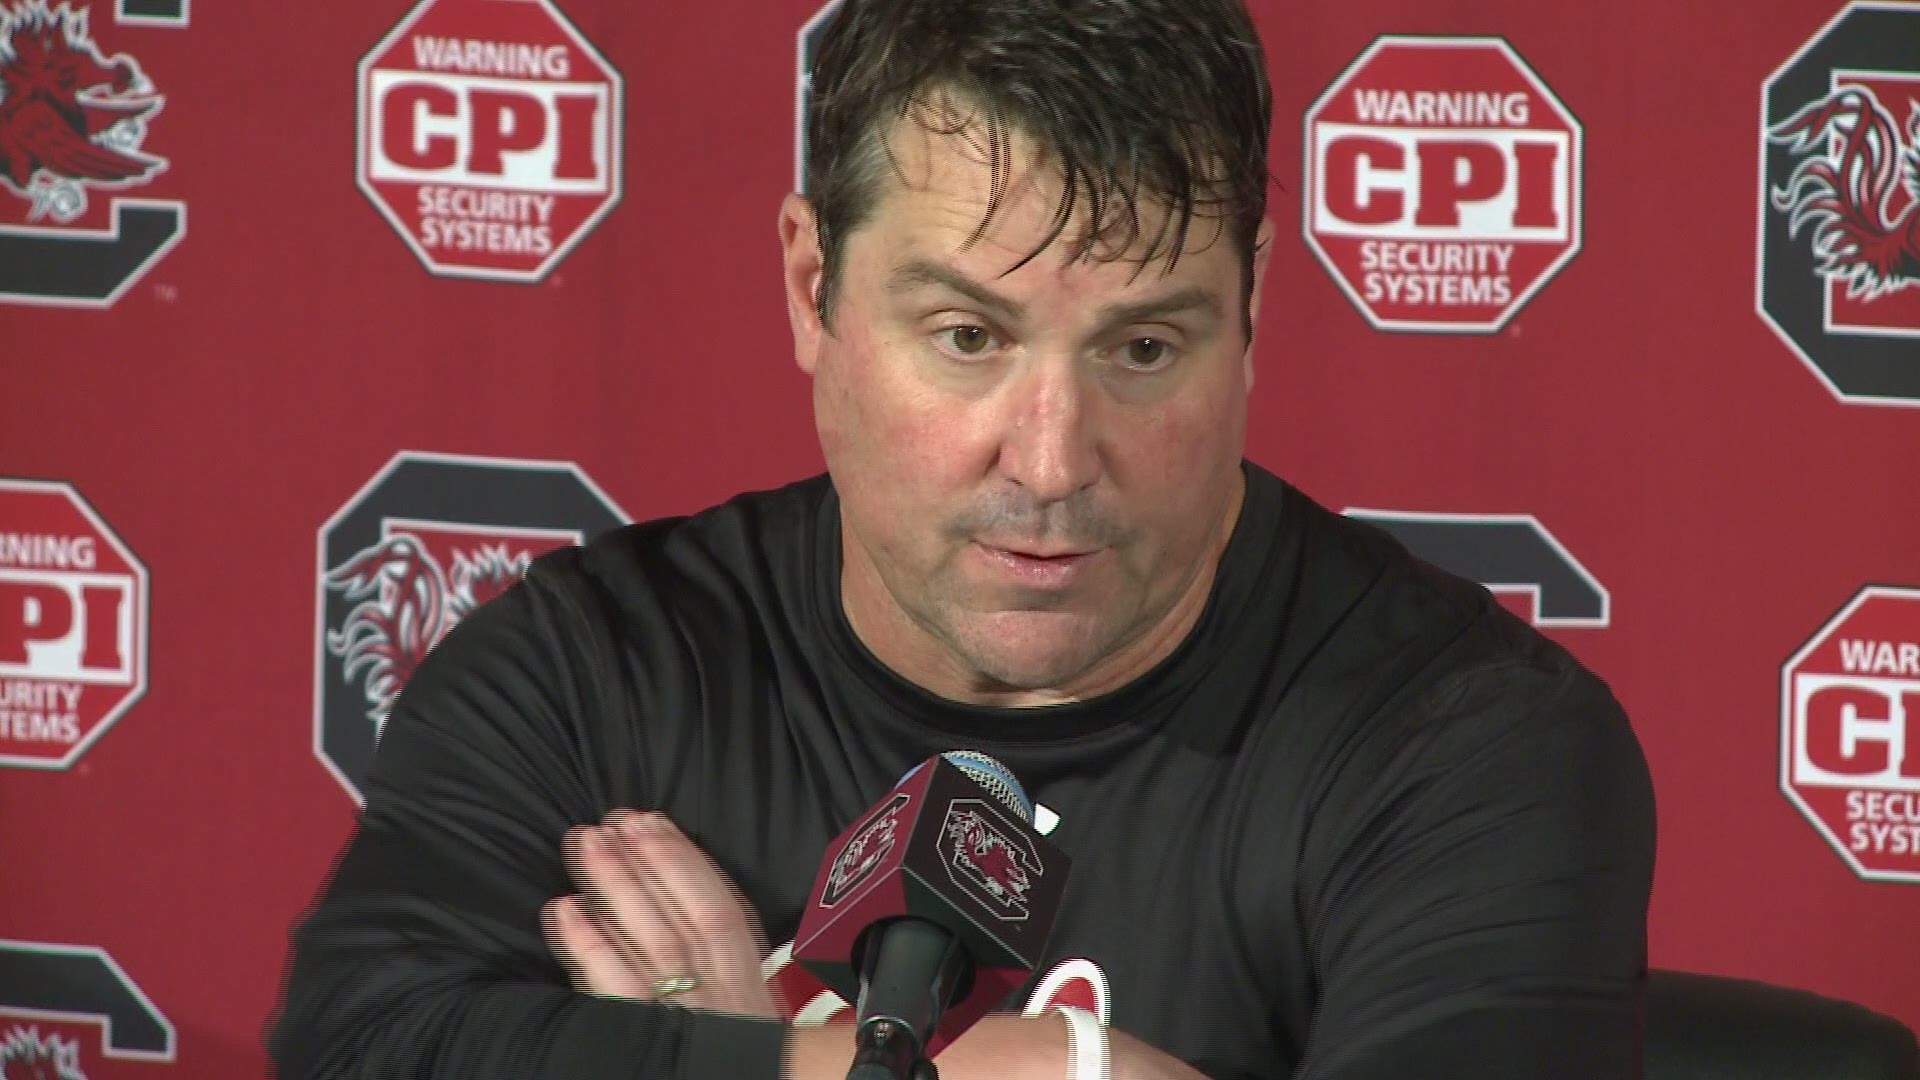 USC head coach Will Muschamp talks to the media following USC's 38-27 loss to Florida.